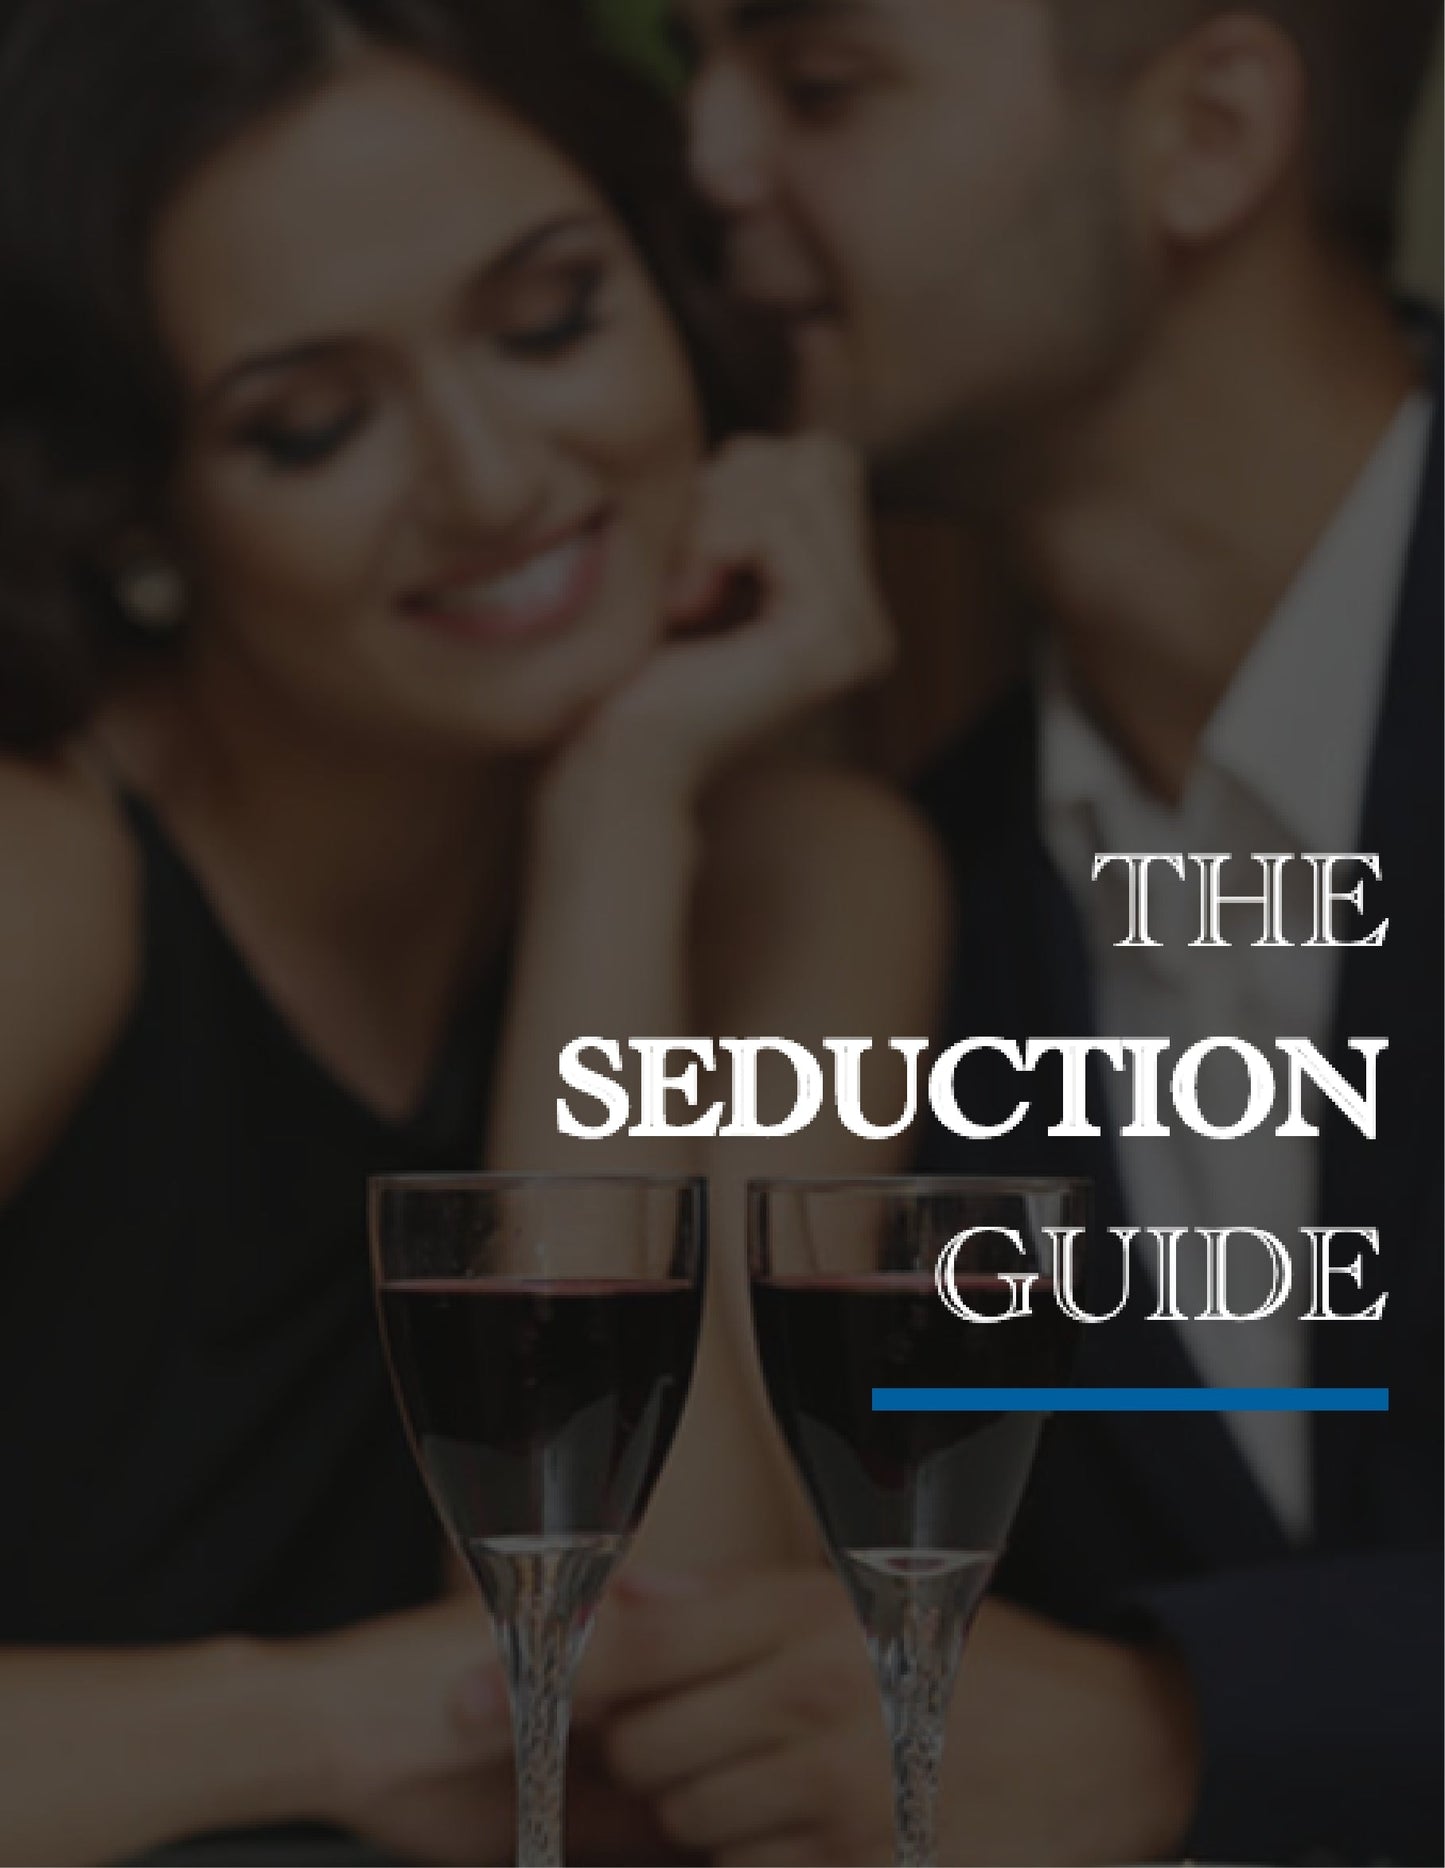 THE SEDUCTION GUIDE